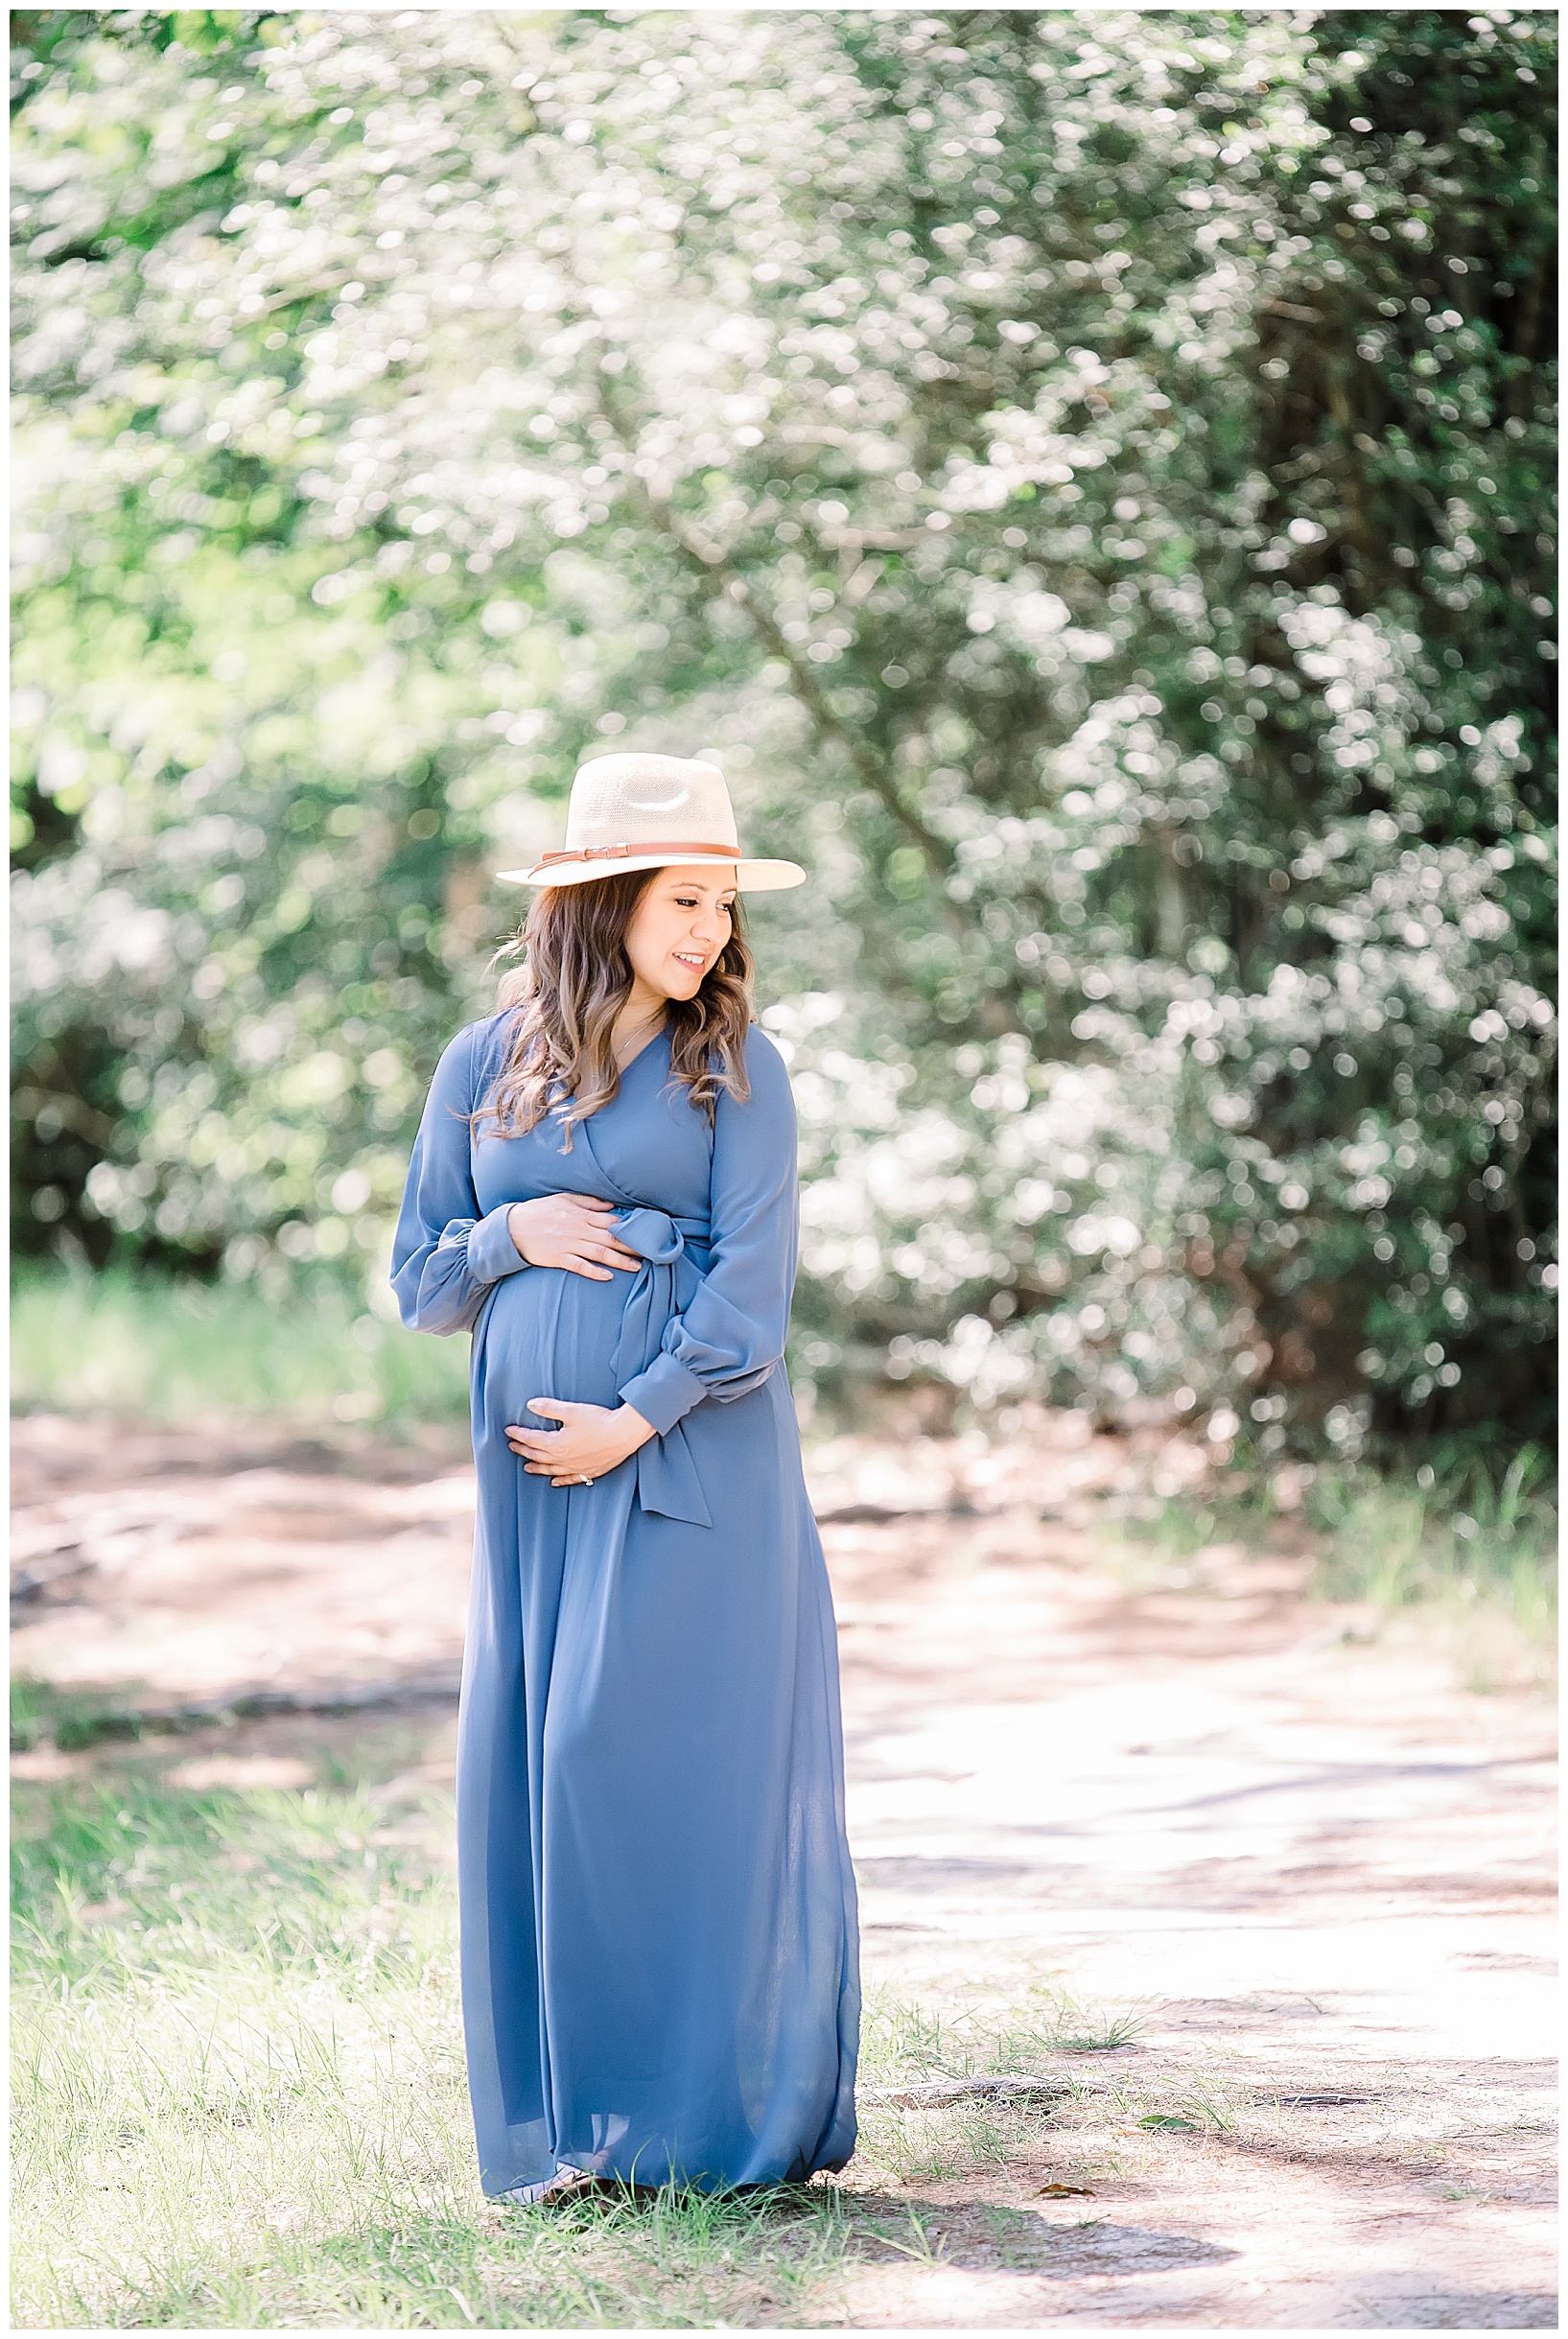 Outdoor maternity photography session in Spring Texas